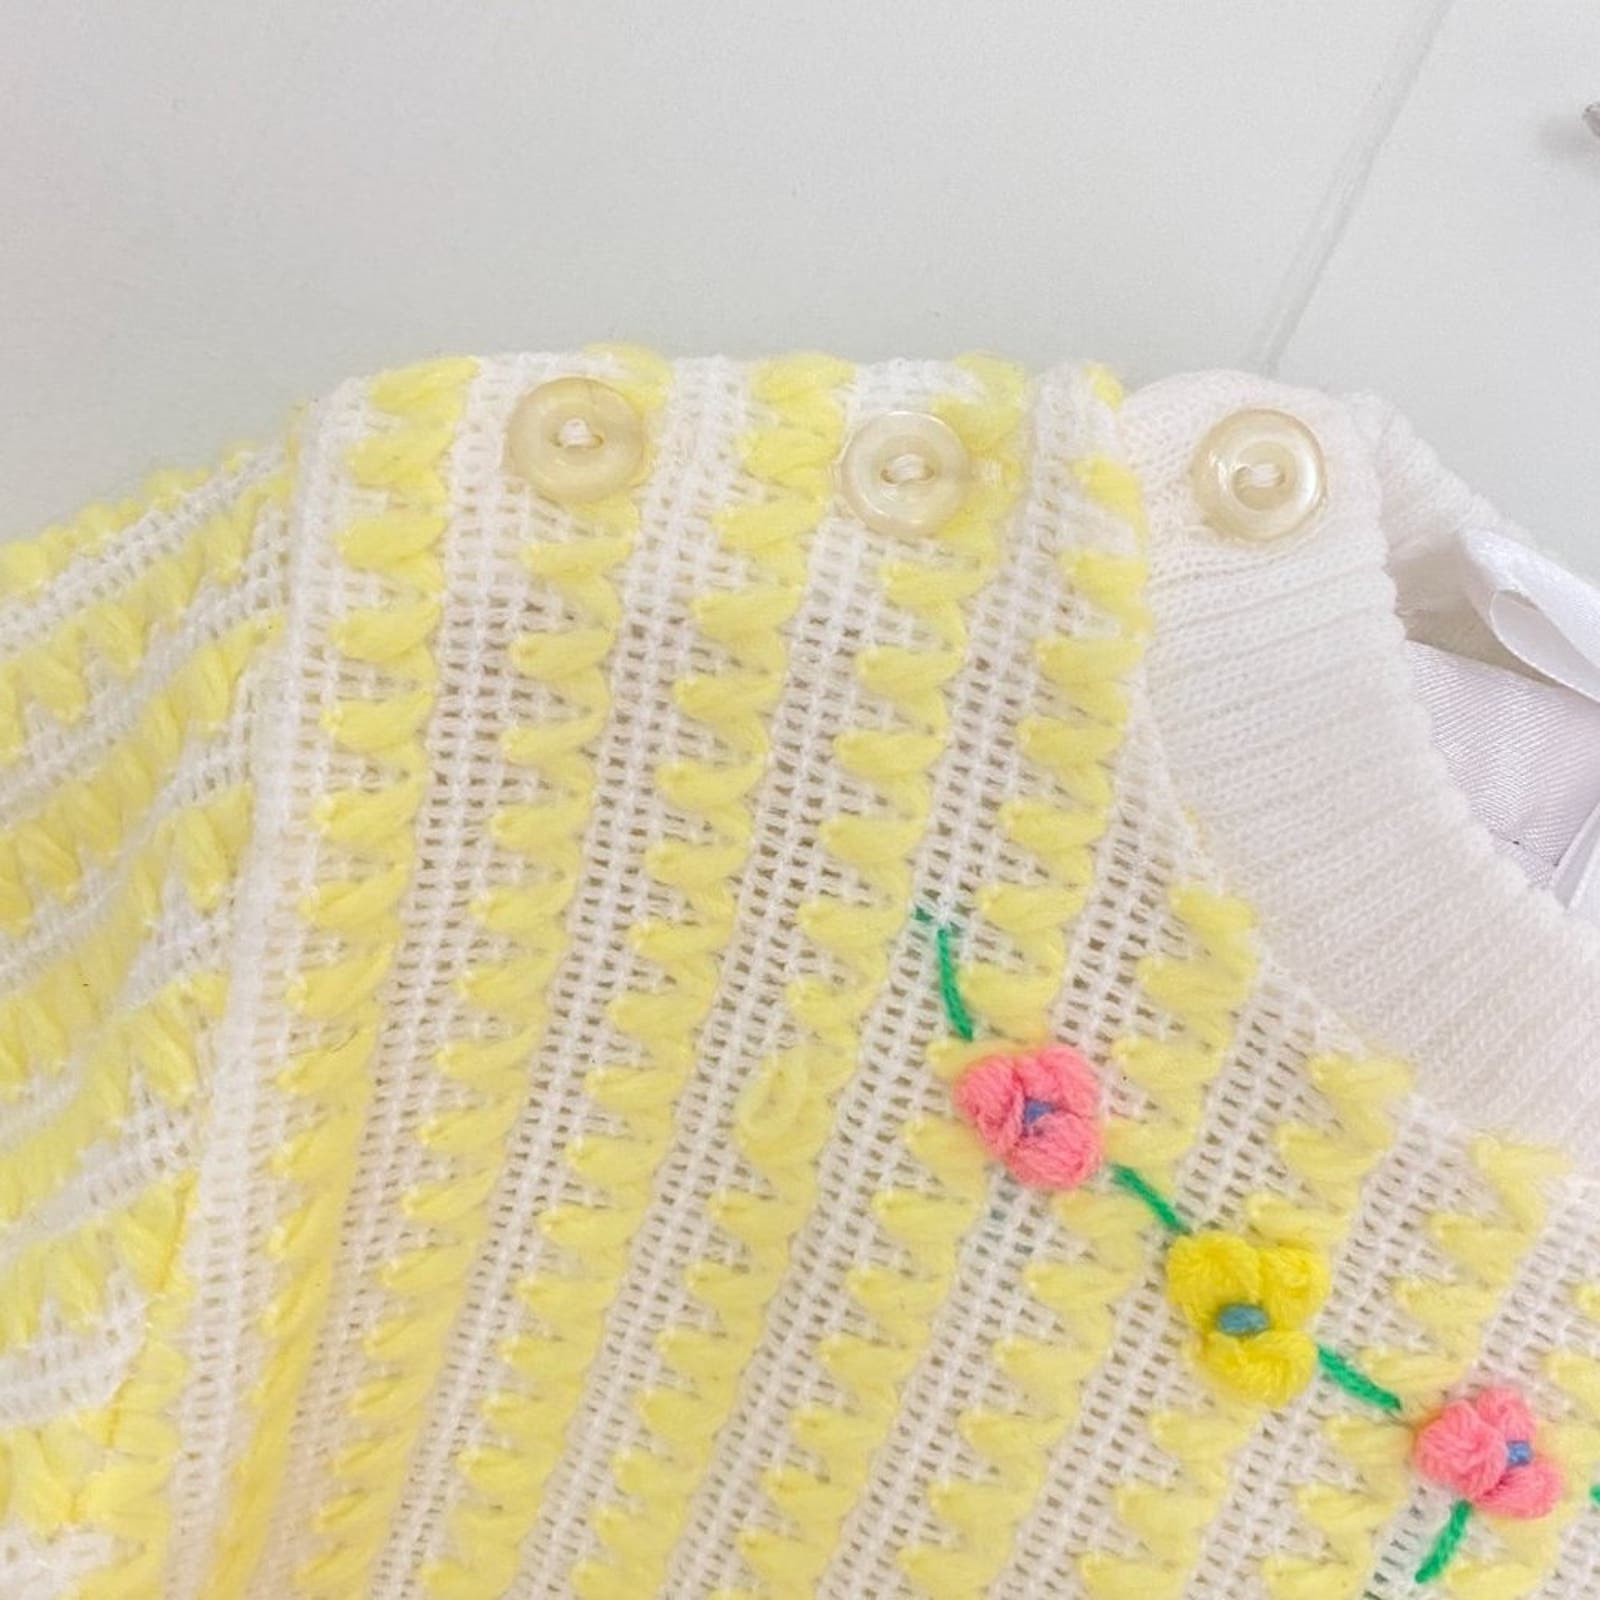 Vintage Novelty Knit Yellow Sweater Set 18 Months